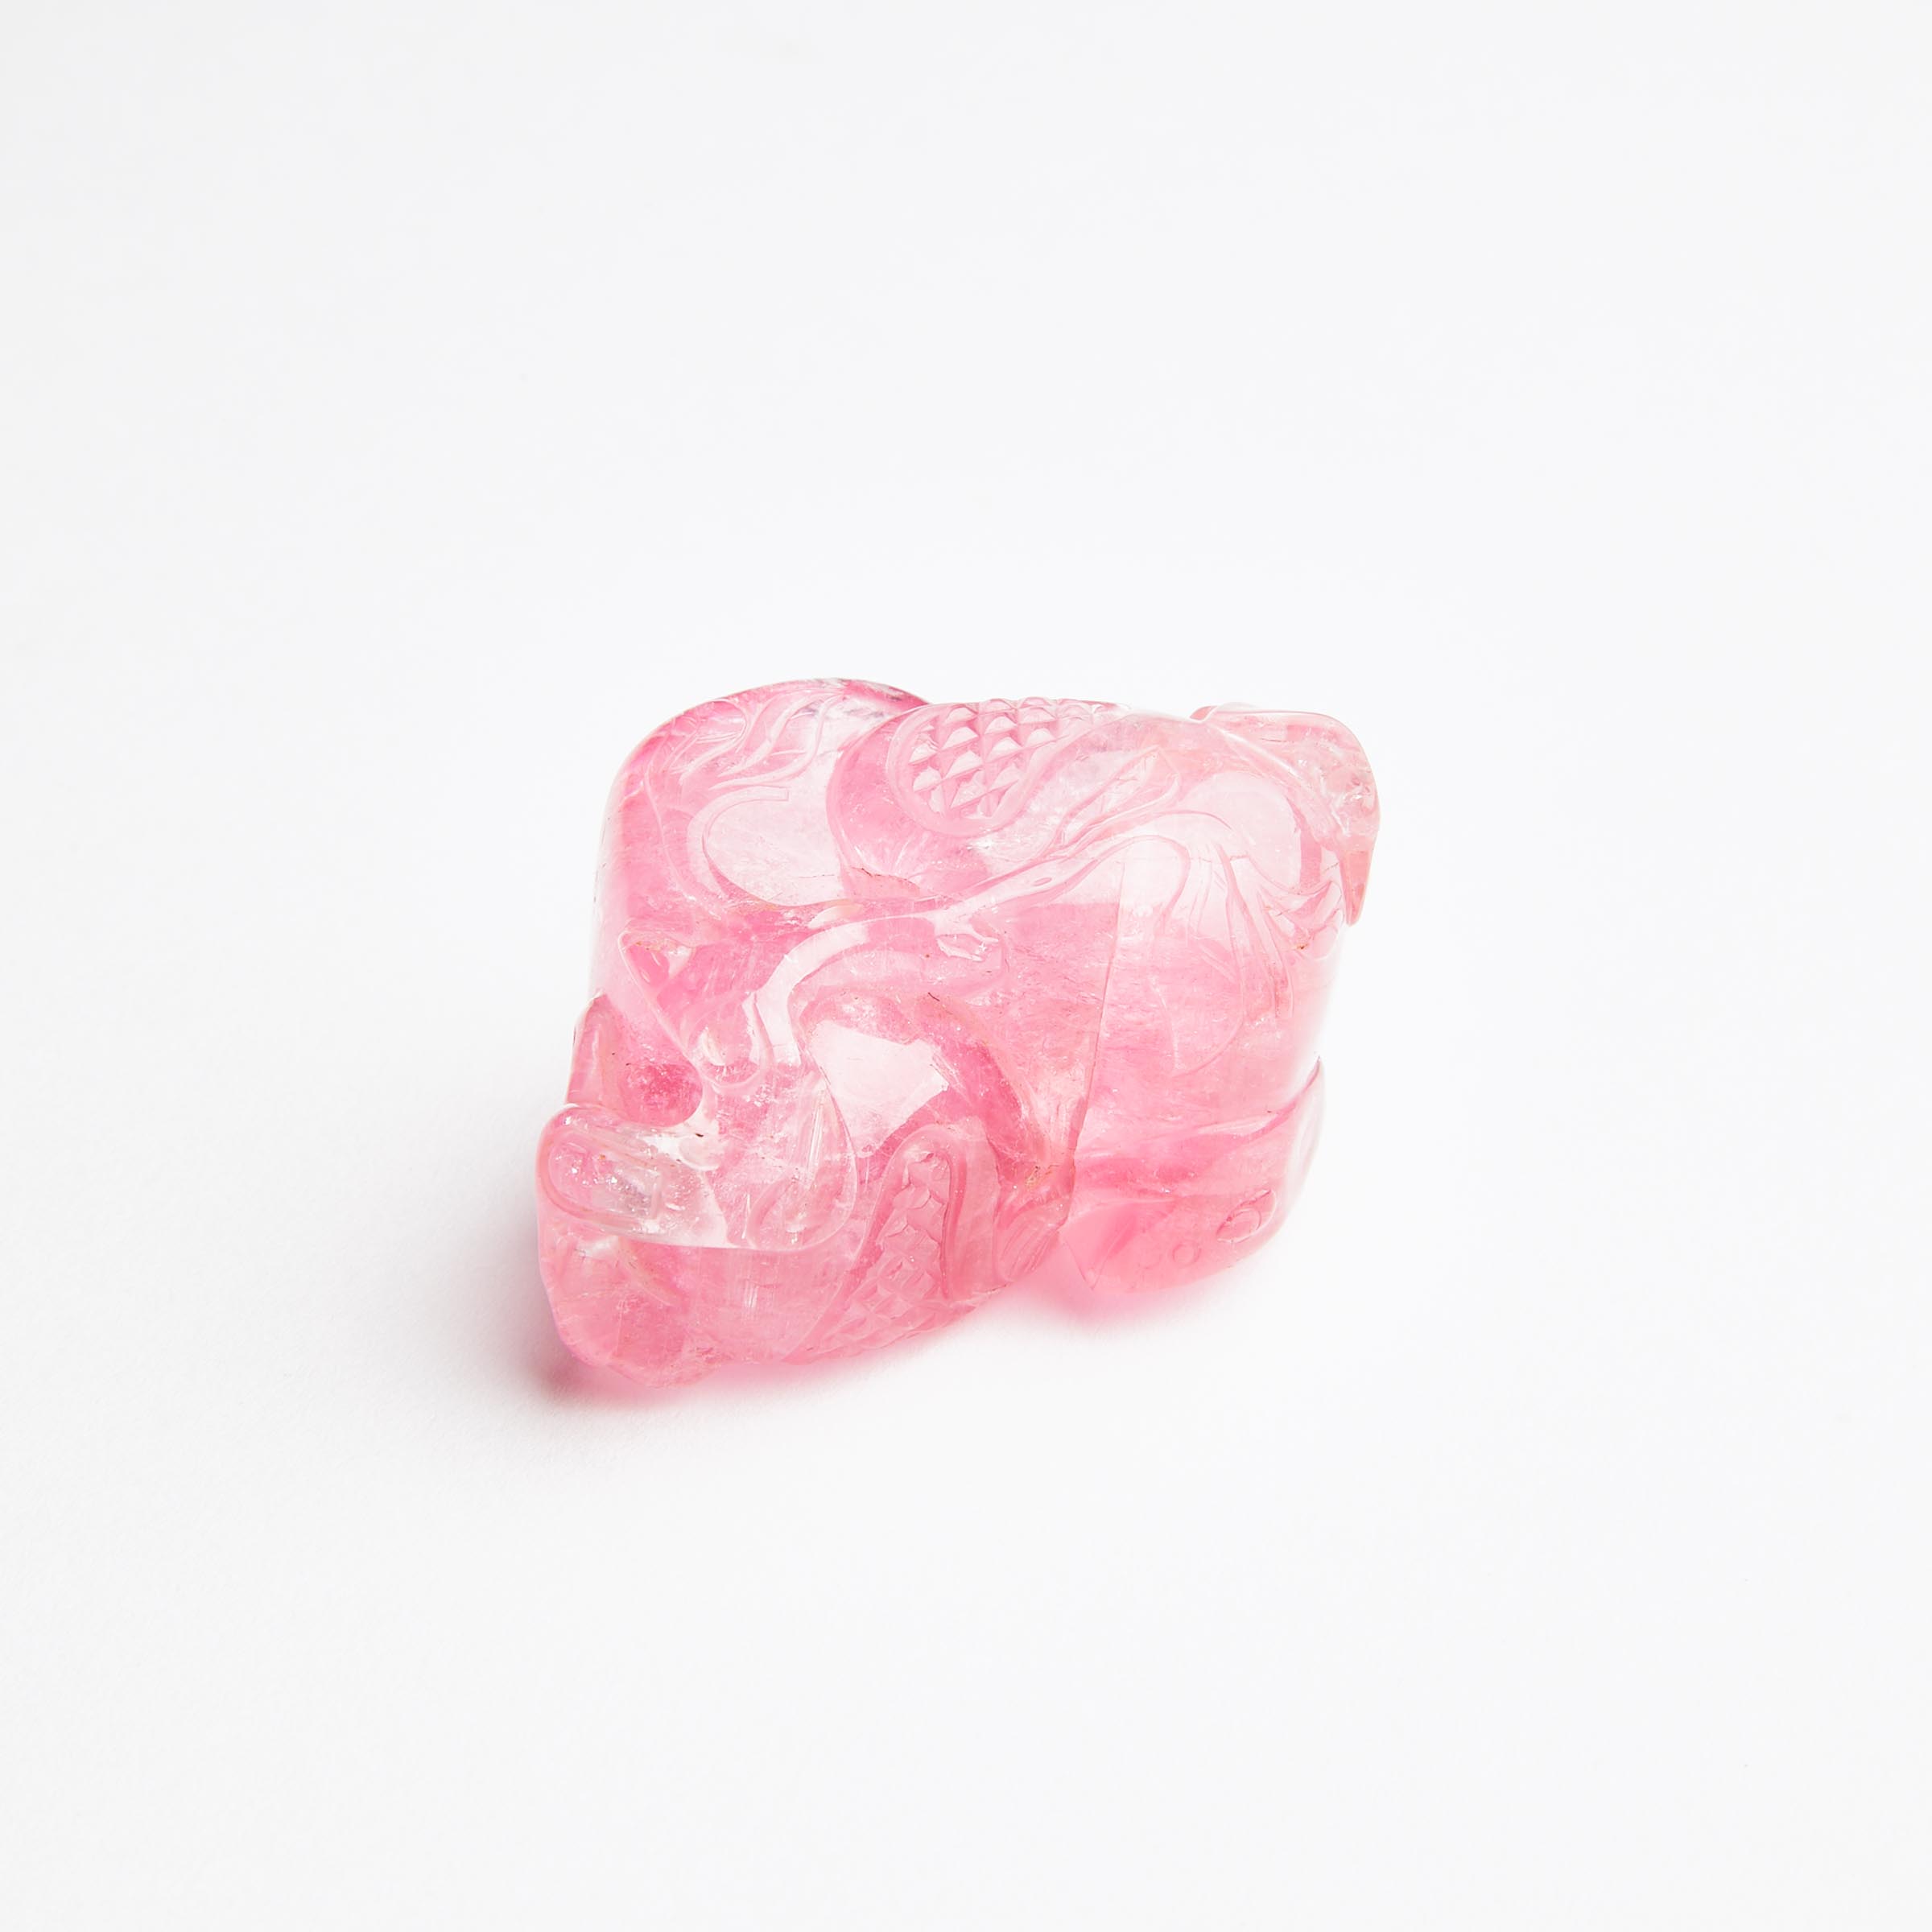 A Pink Tourmaline 'Squirrel and